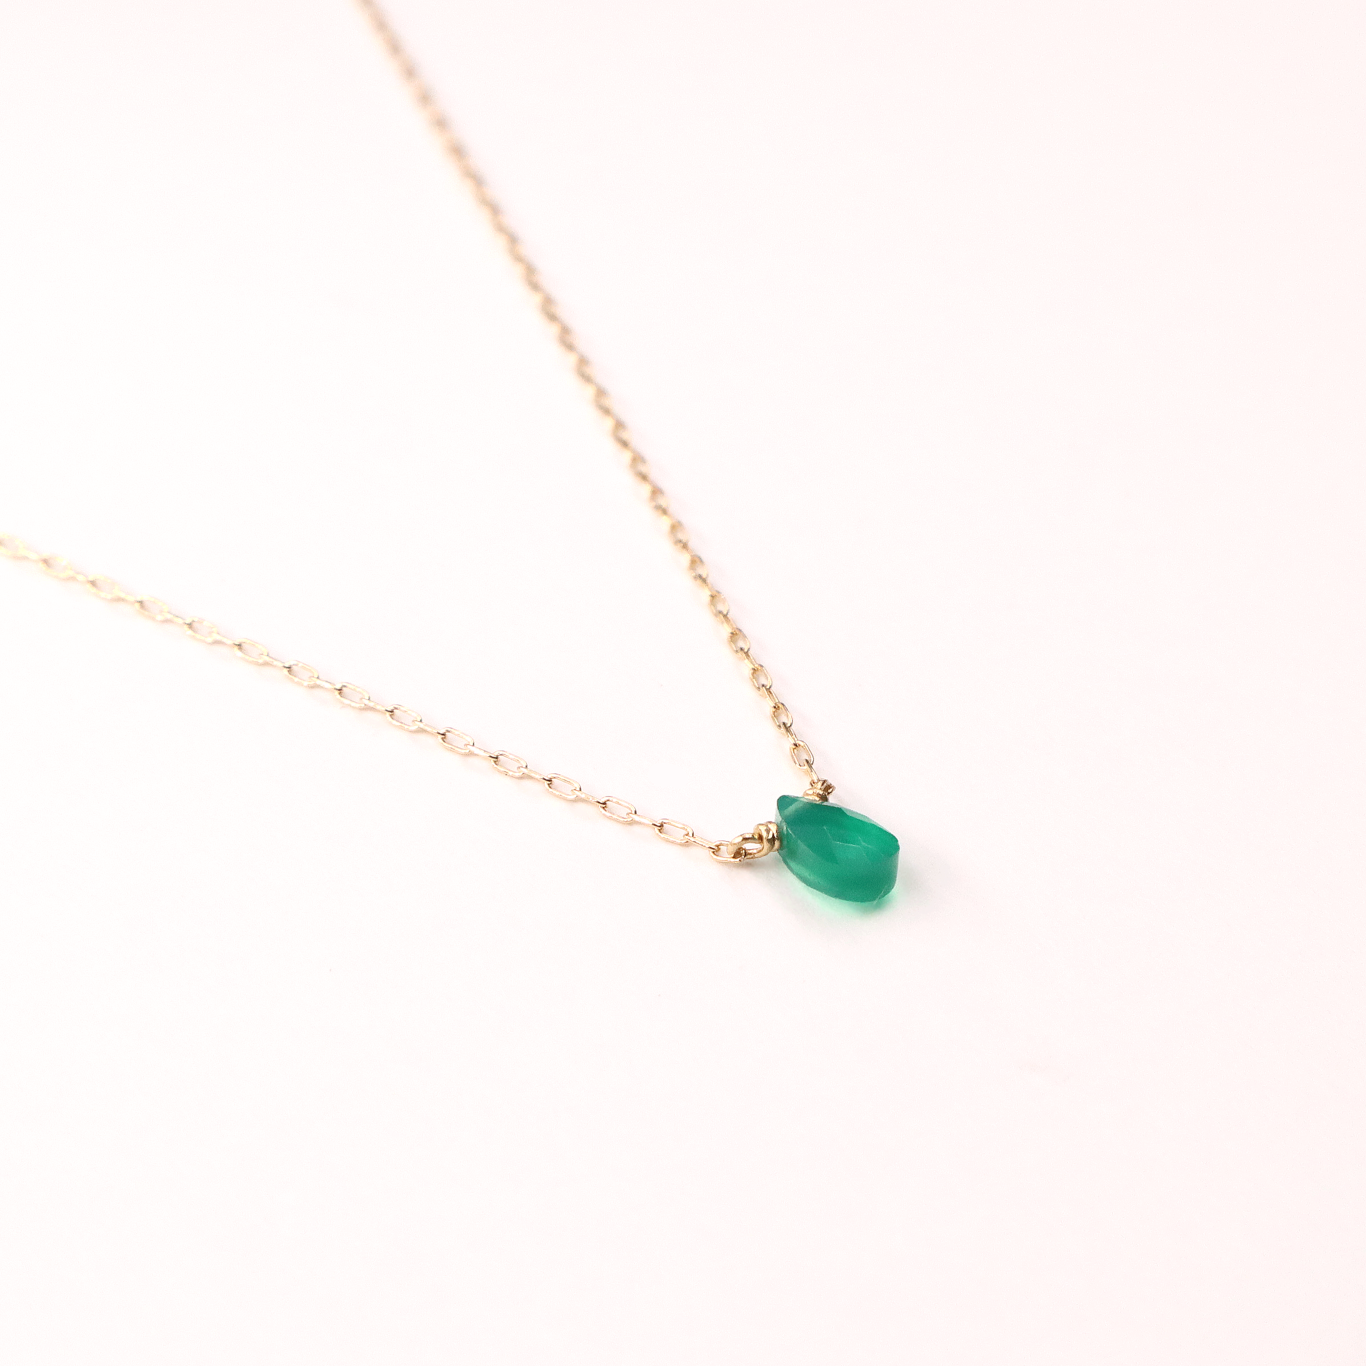 Natural stone necklace/green onyx